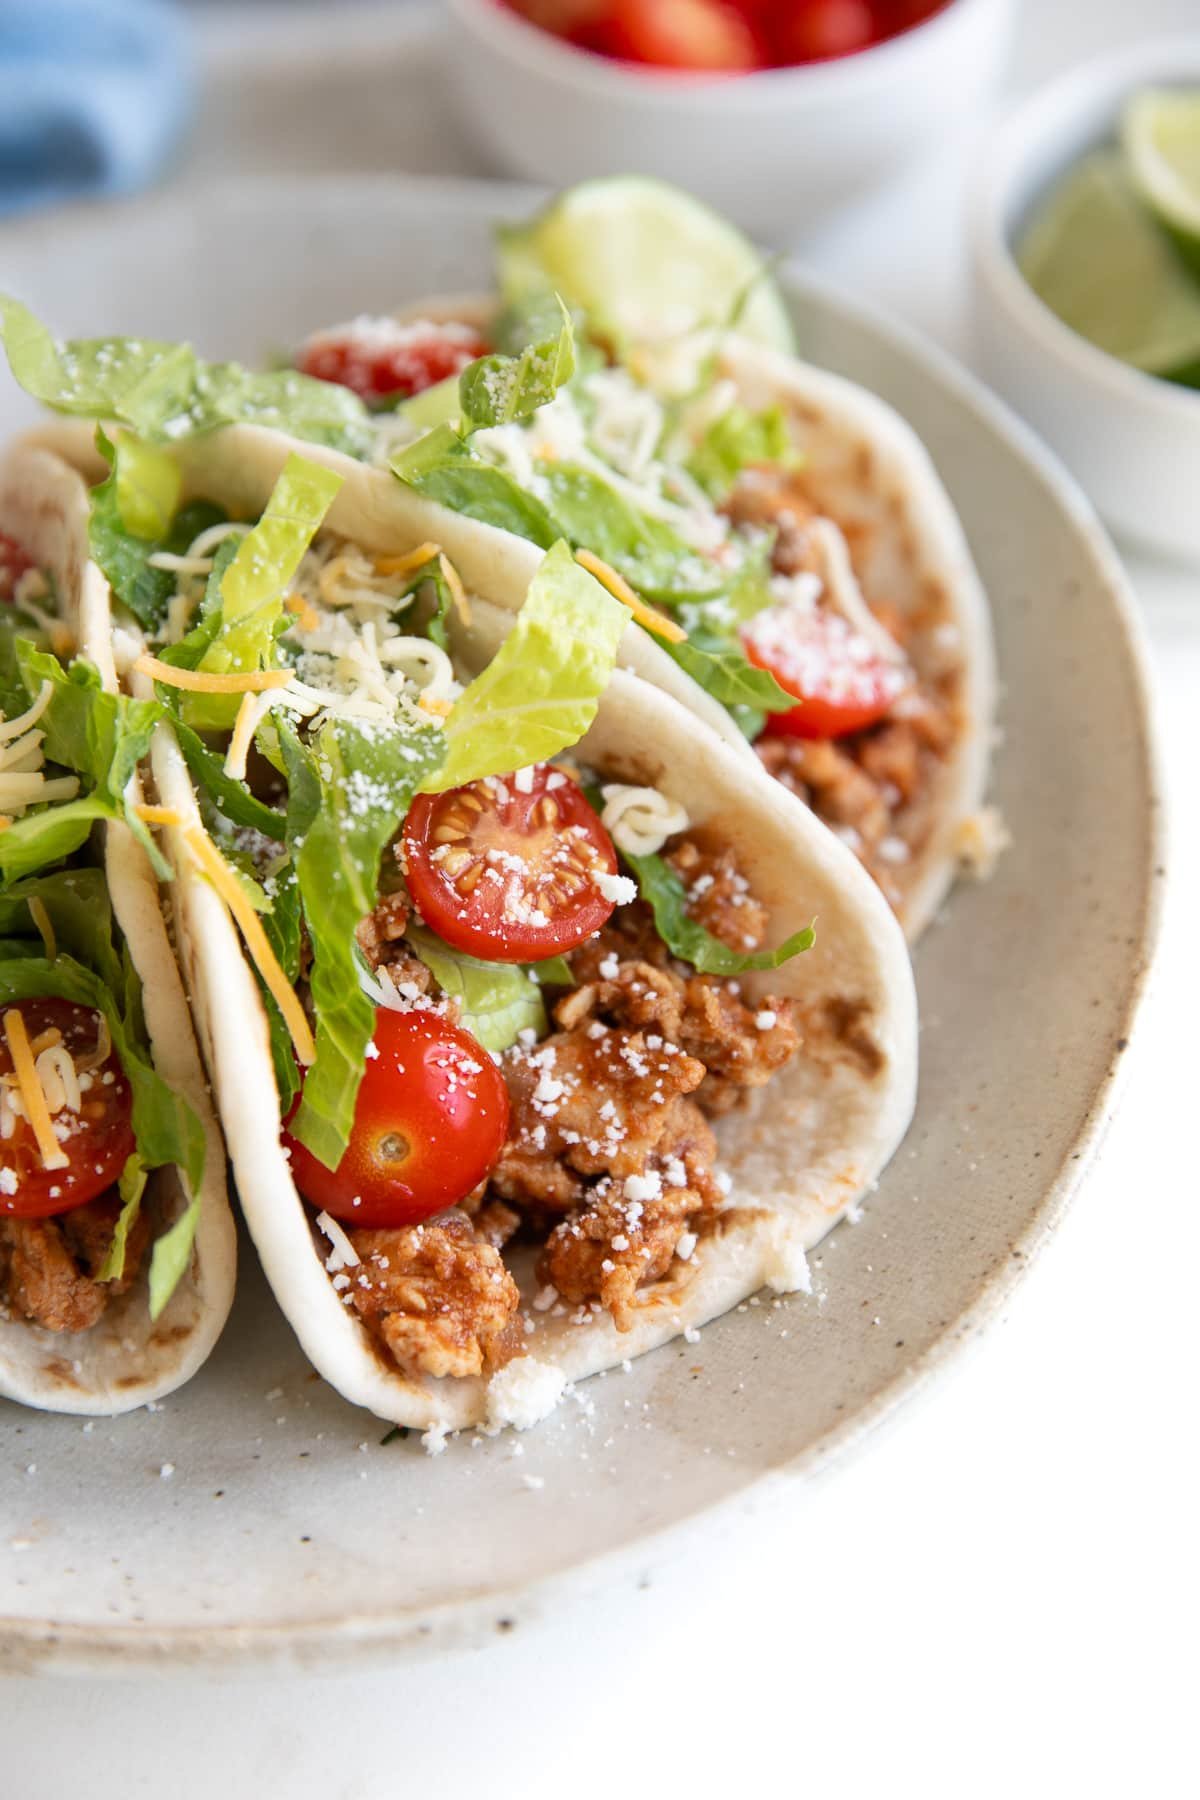 Three ground turkey tacos filled with ground turkey taco meat and topped with tomatoes, lettuce, and cheese, on a small serving plate.